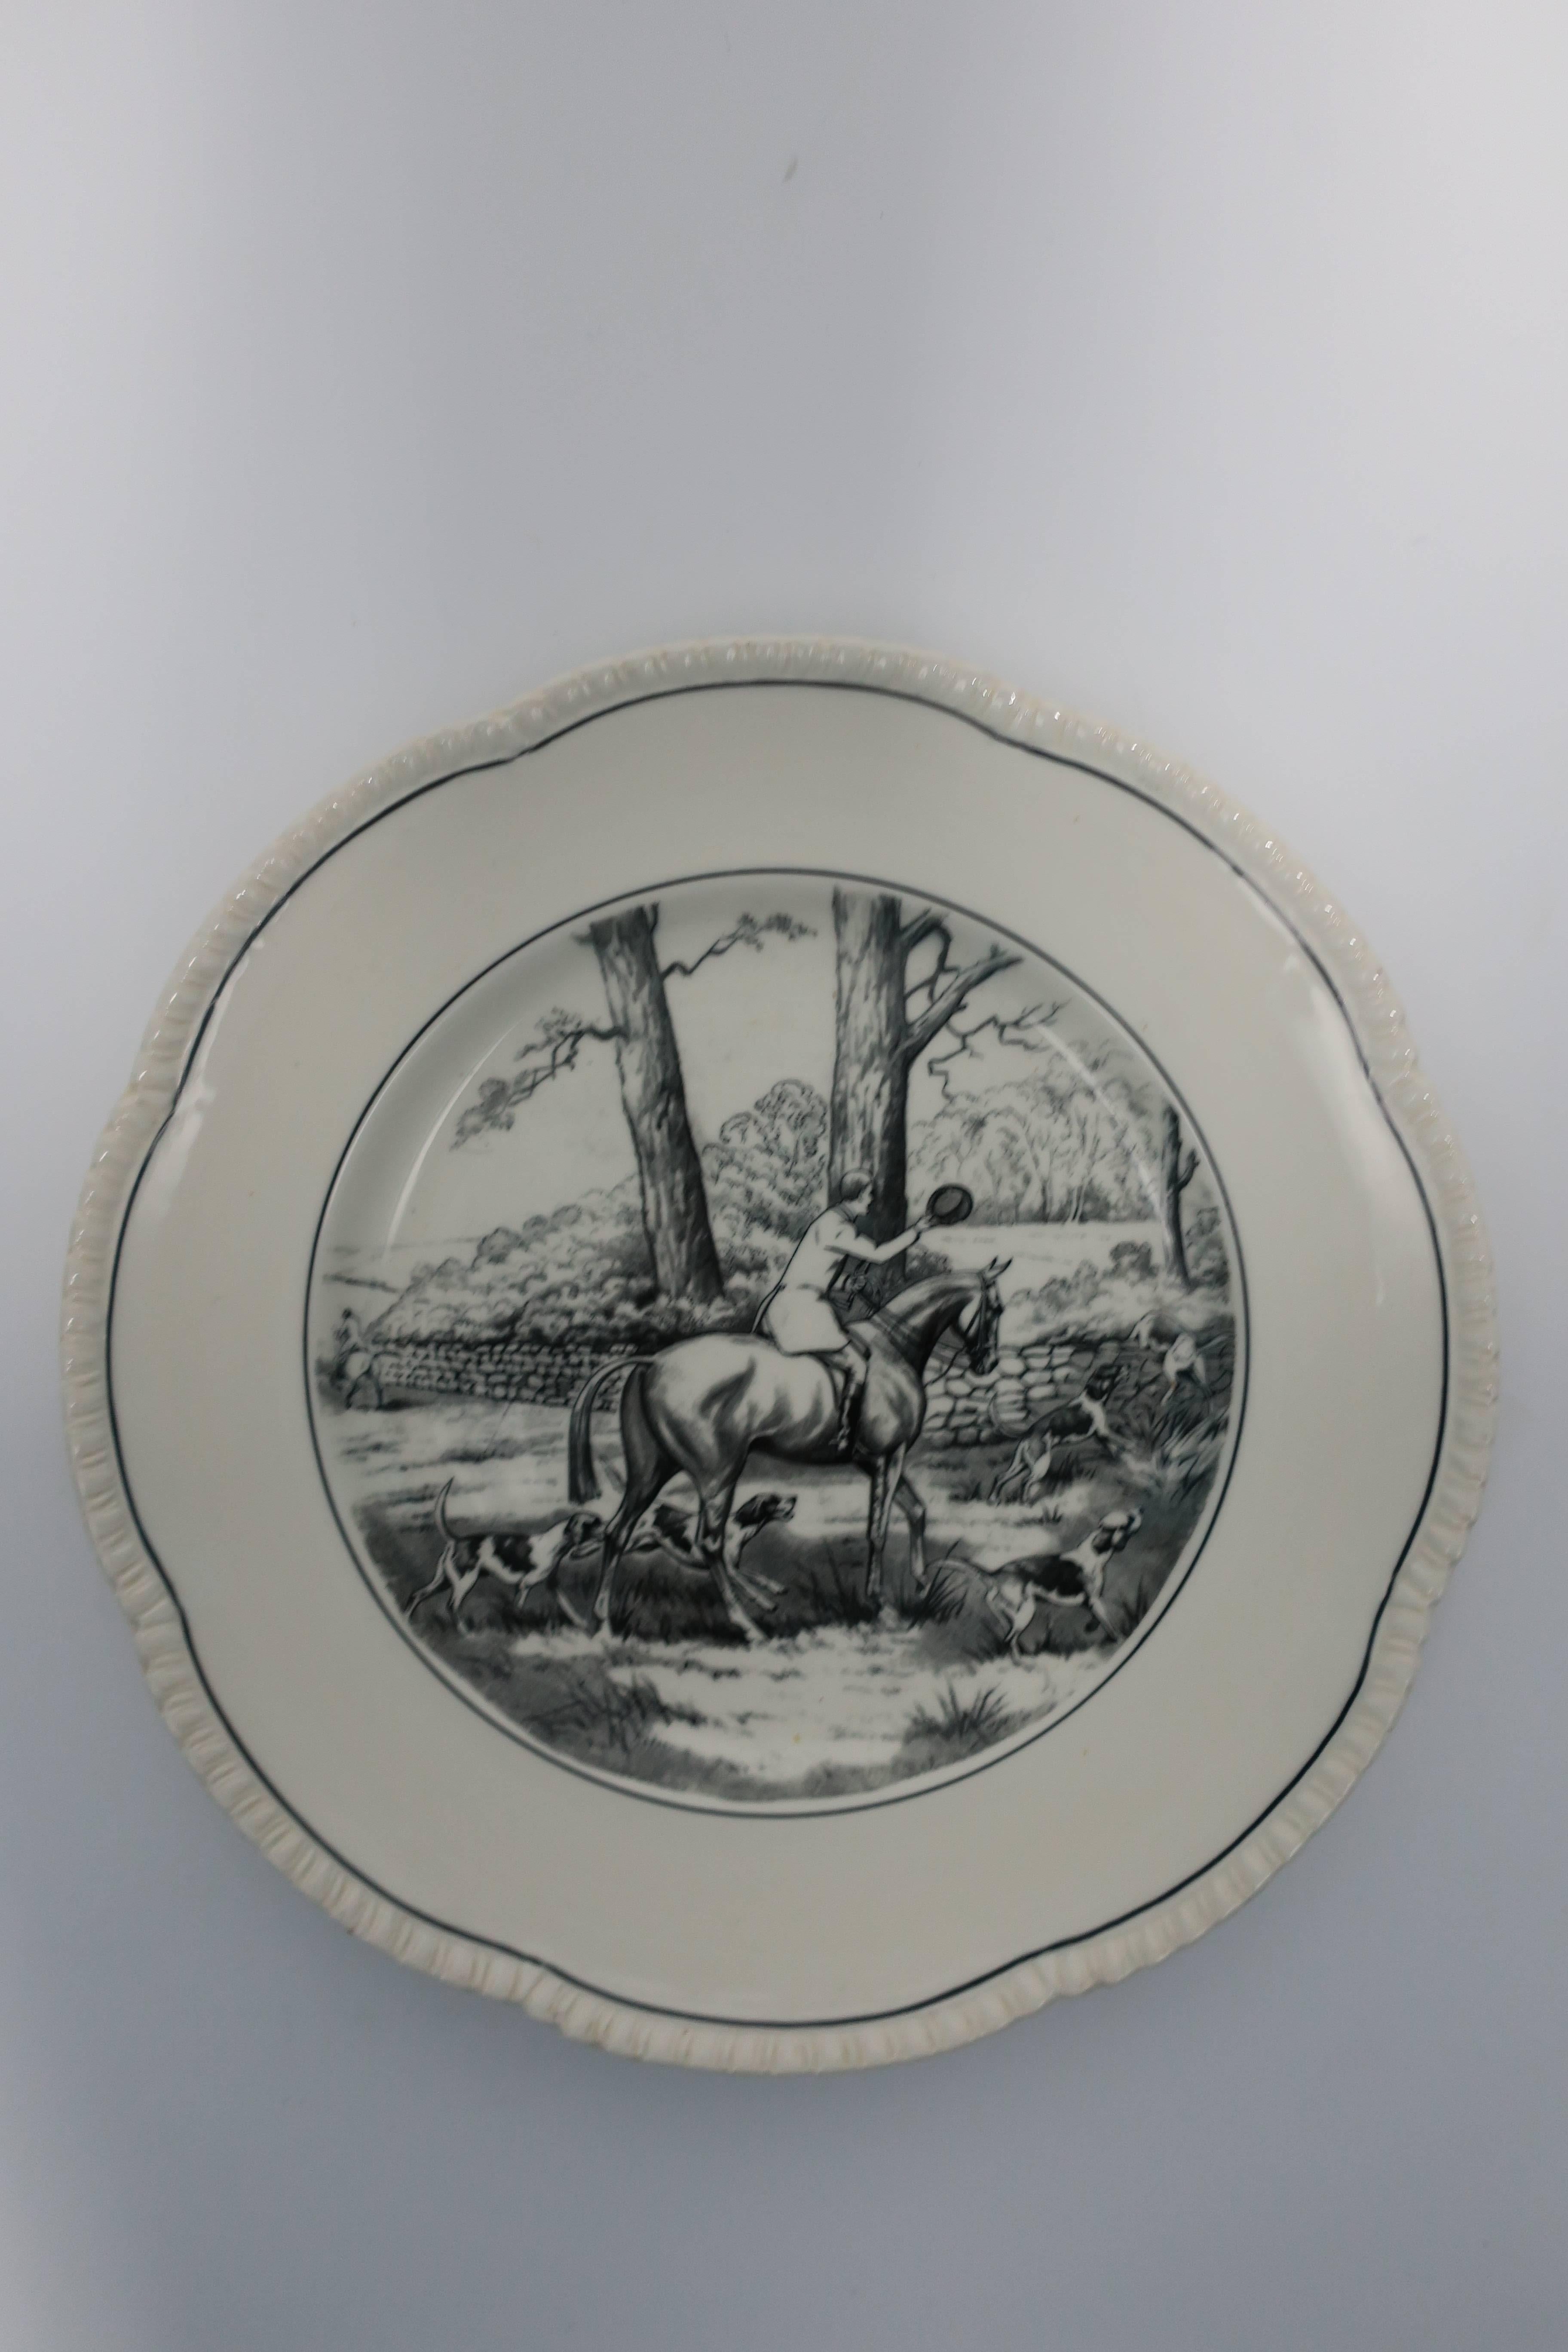 Glazed Black and Whtie English Horse or Equine Porcelain Plate or Wall Art For Sale